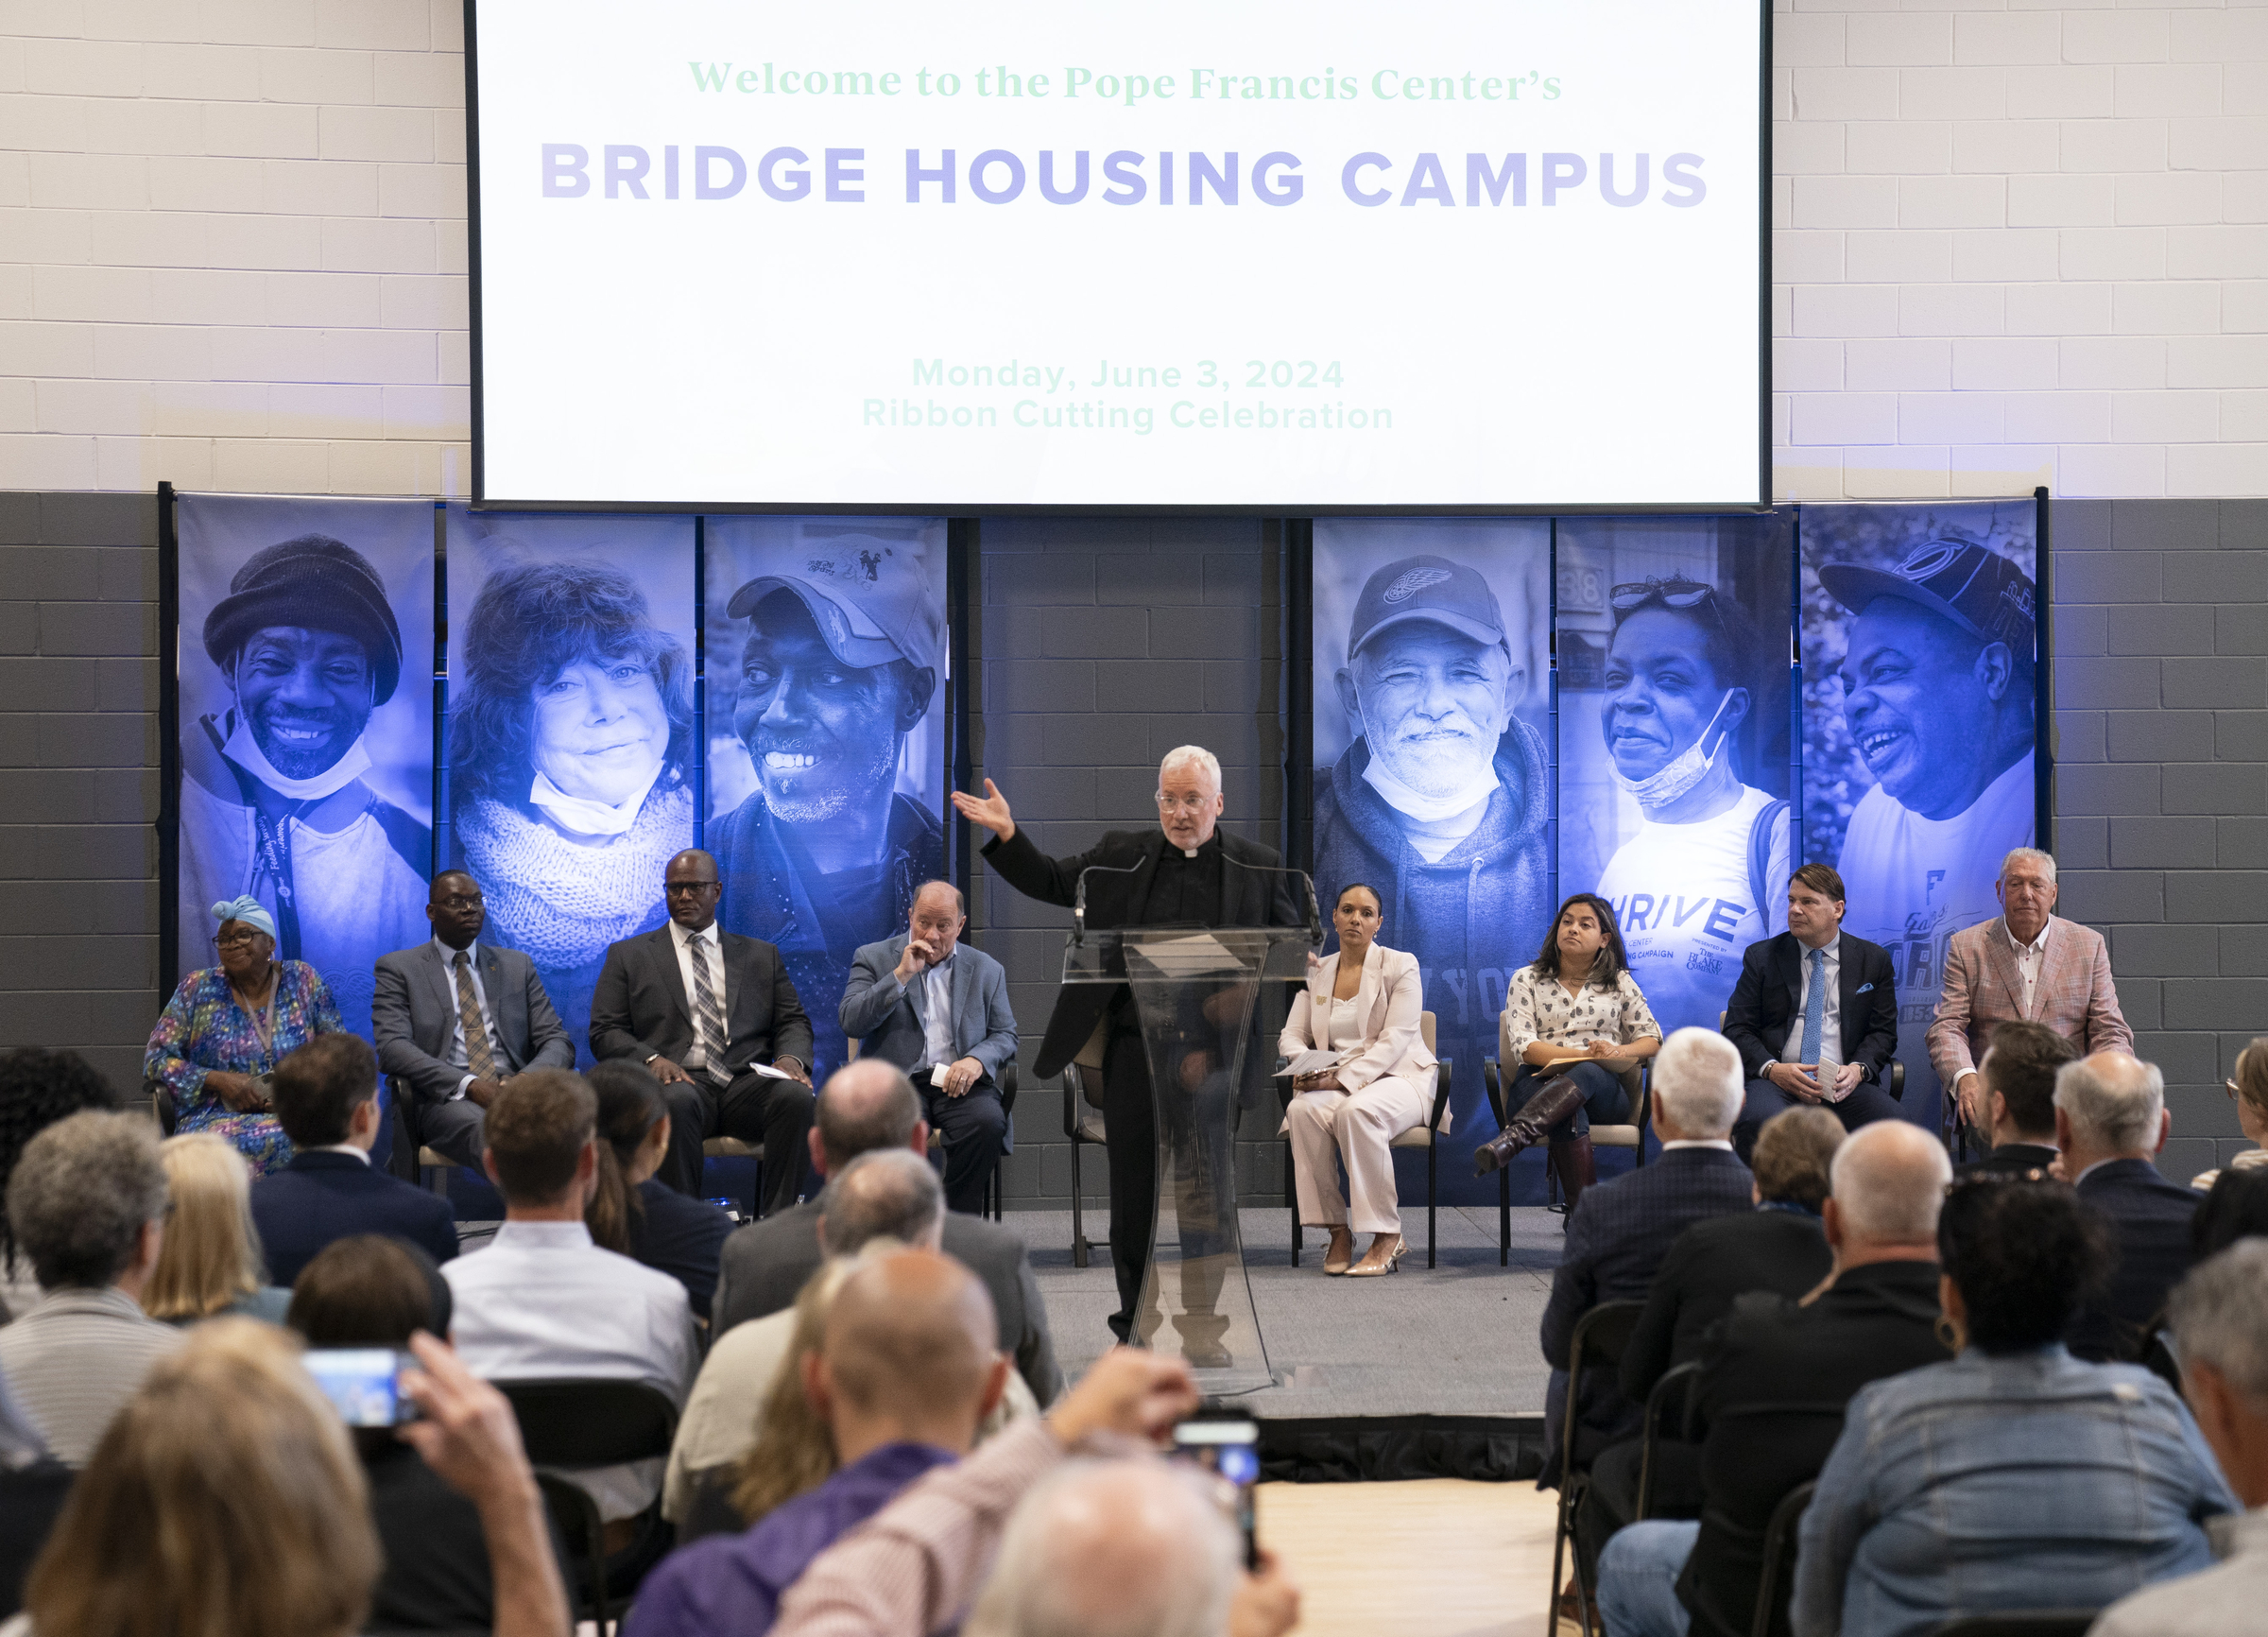 ‘Change people’s lives forever’: New housing campus for homeless opens